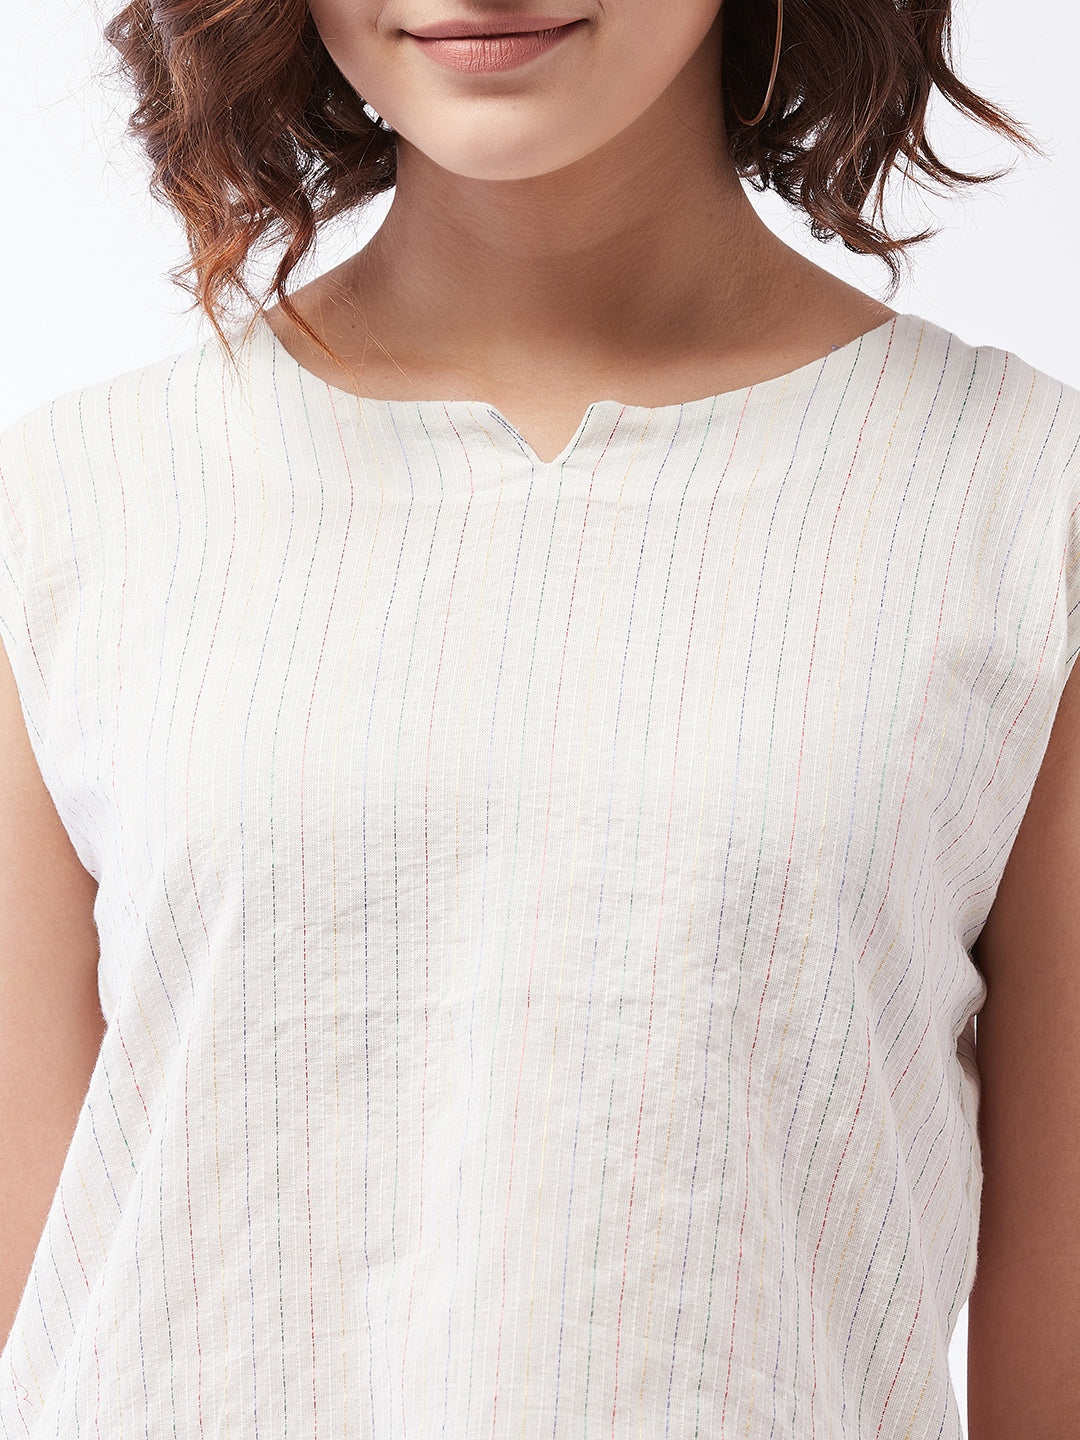 Off White Kantha Sleeveless Top For Teens